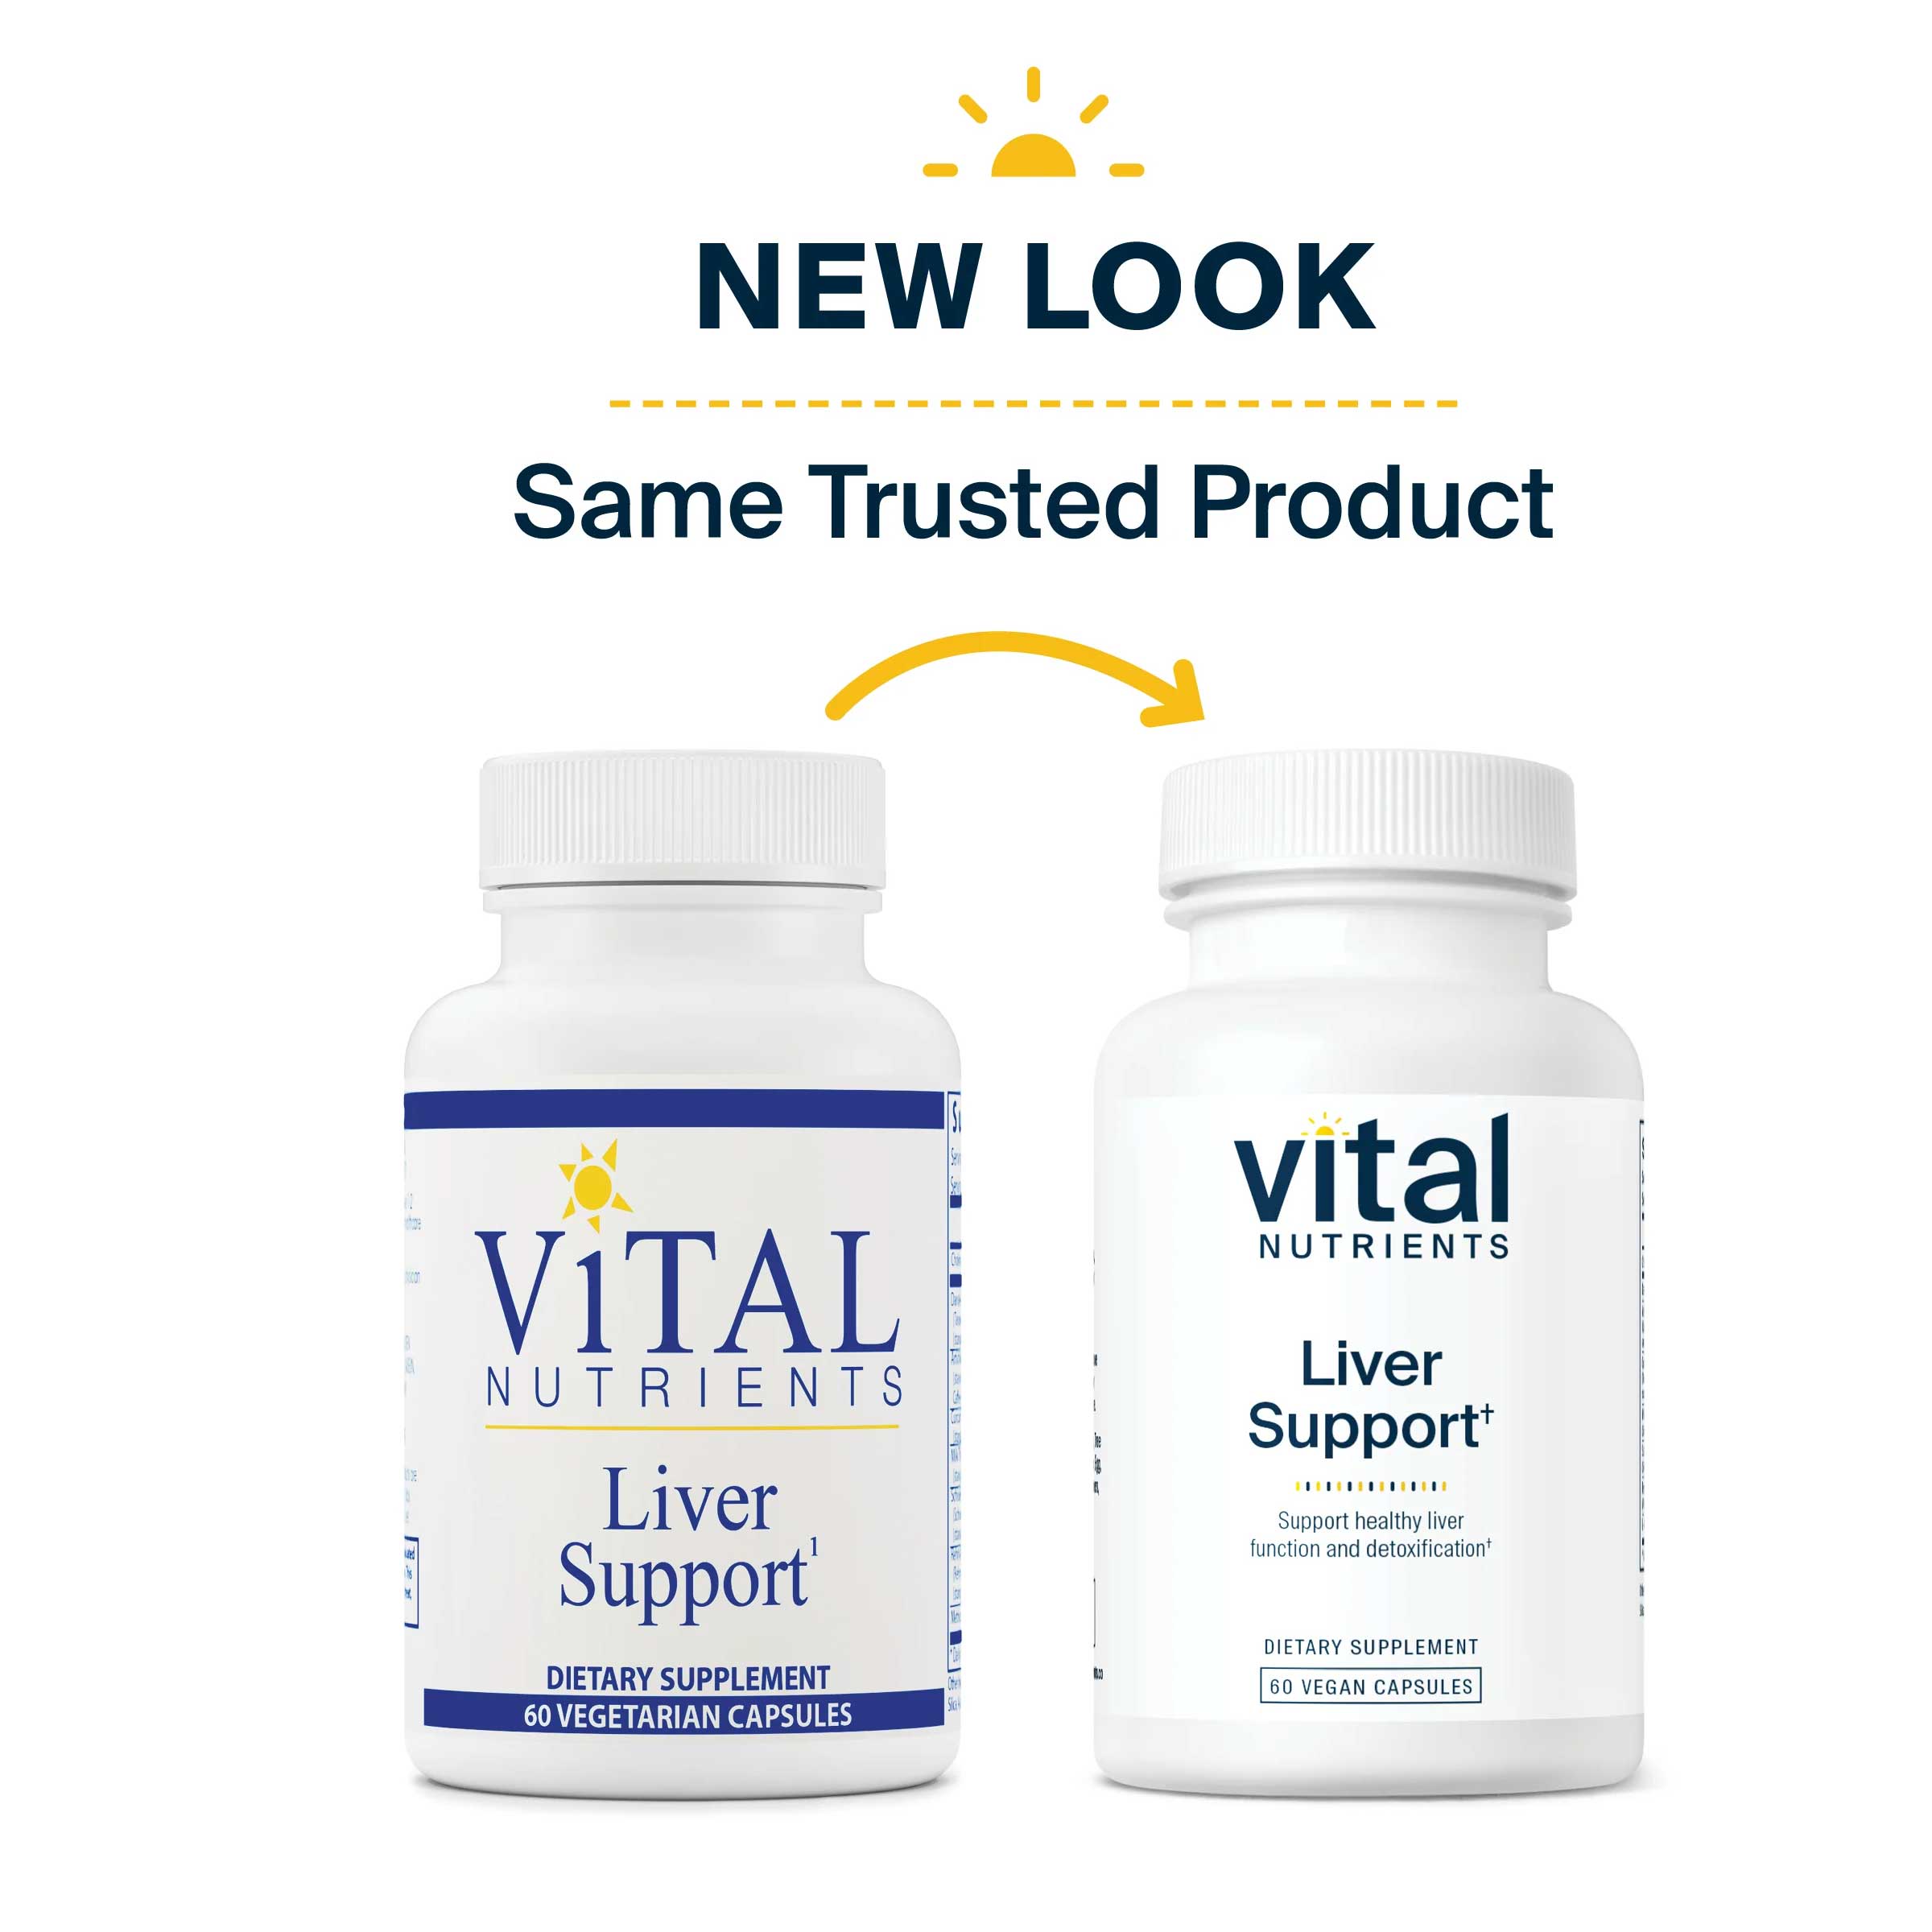 Vital Nutrients Liver Support New Look